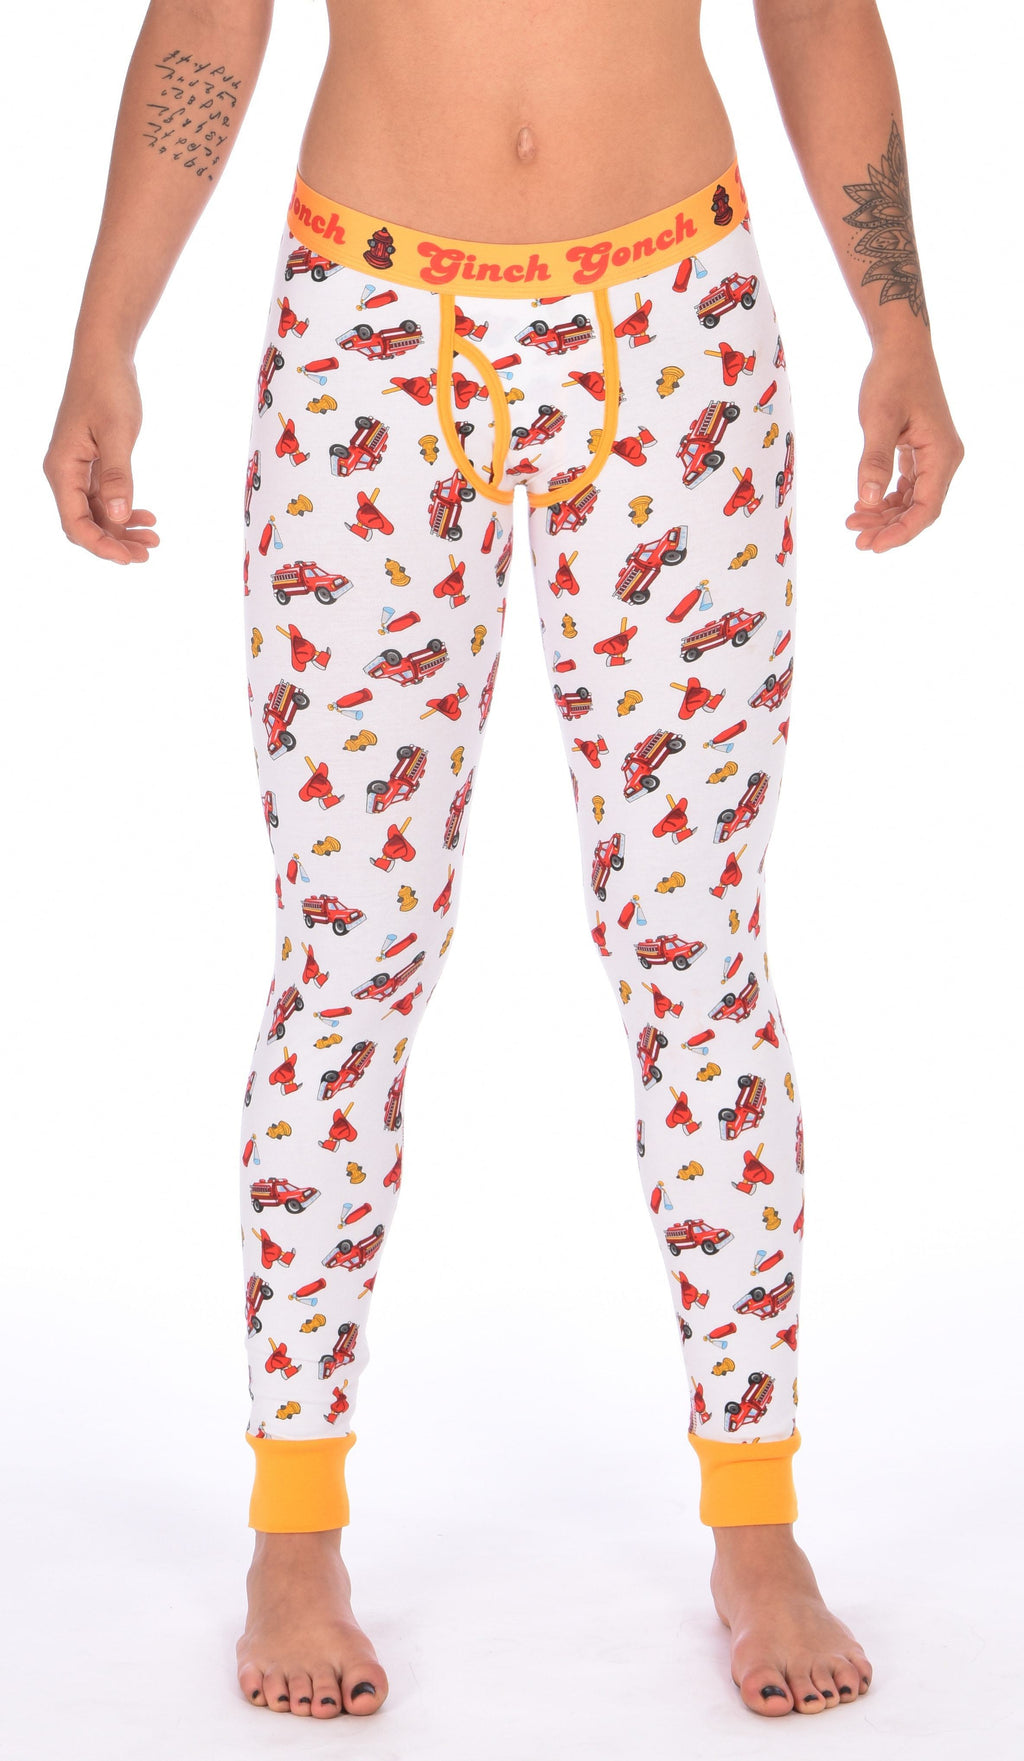 Ginch Gonch GG Fire Fighters long johns leggings women's underwear y front white fabric with fire engines hats and hydrants, yellow trim and yellow printed waistband front